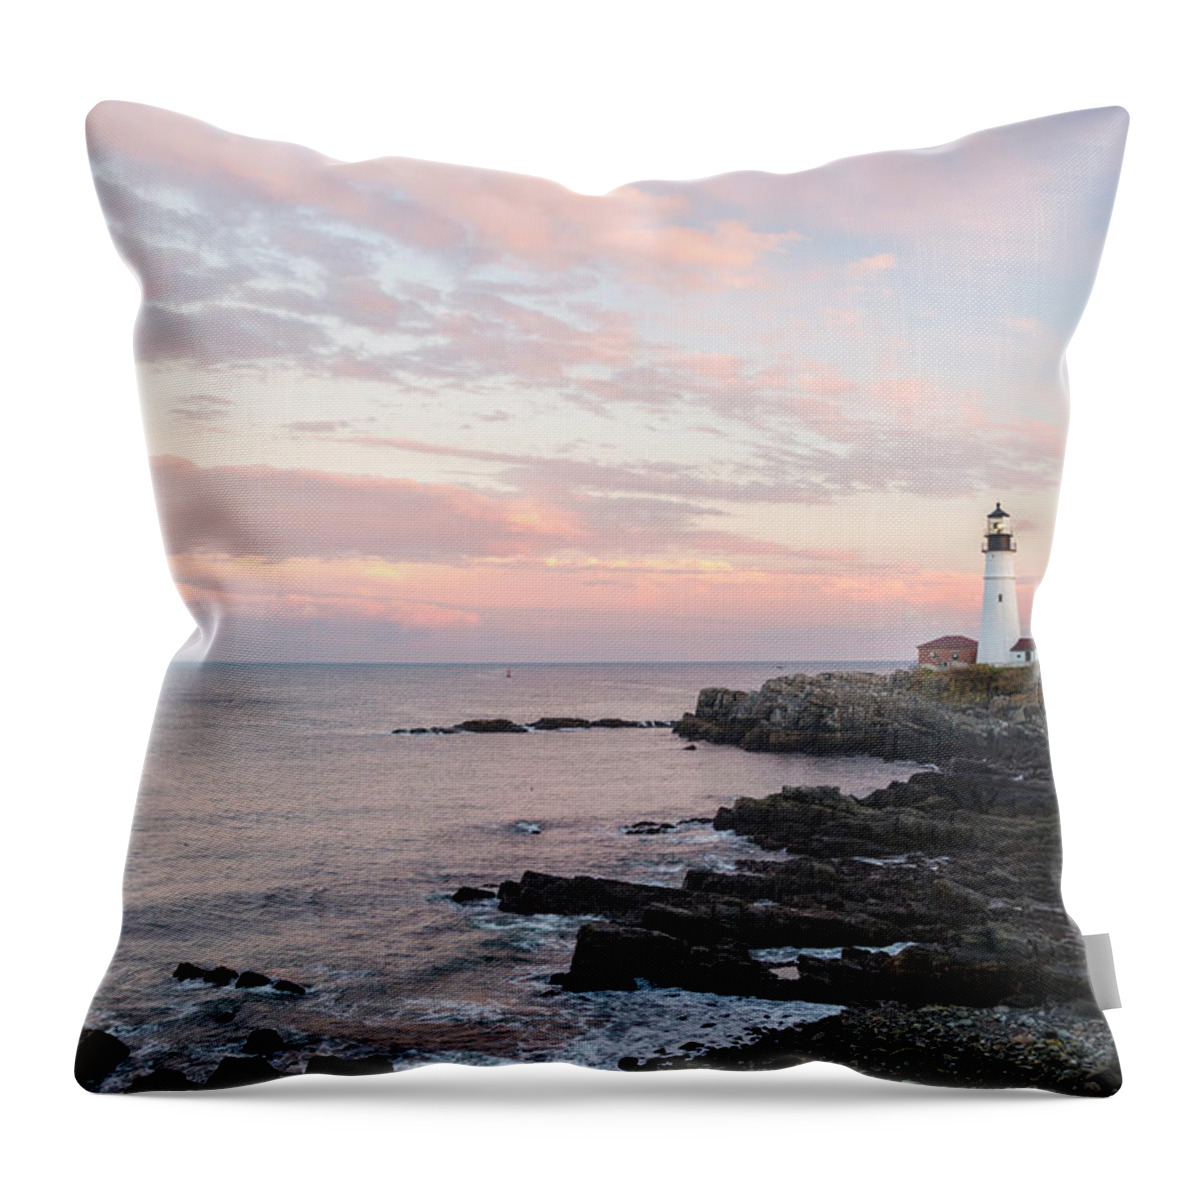 Seascape Throw Pillow featuring the photograph Portland Head Light Lighthouse Sunset by Picturelake